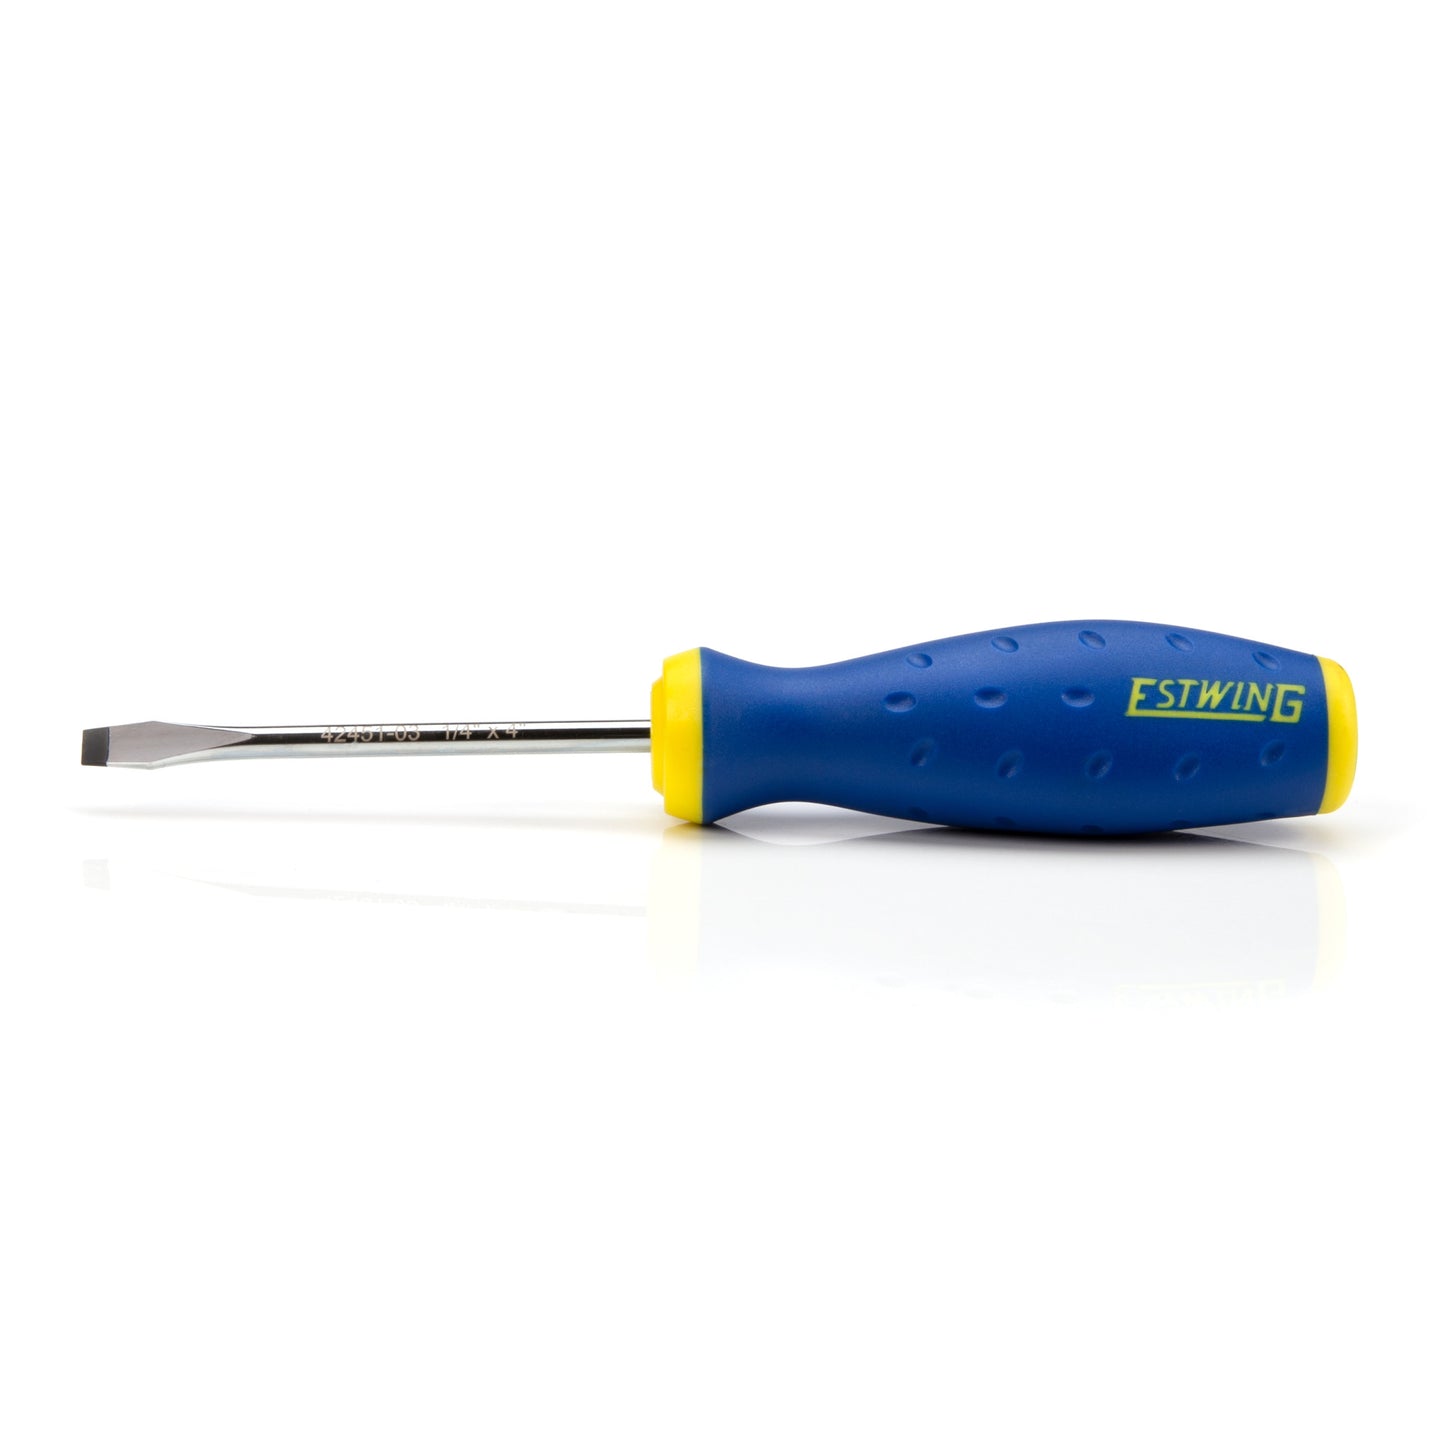 1/4-Inch x 4-Inch Magnetic Slotted Tip Screwdriver with Ergonomic Handle